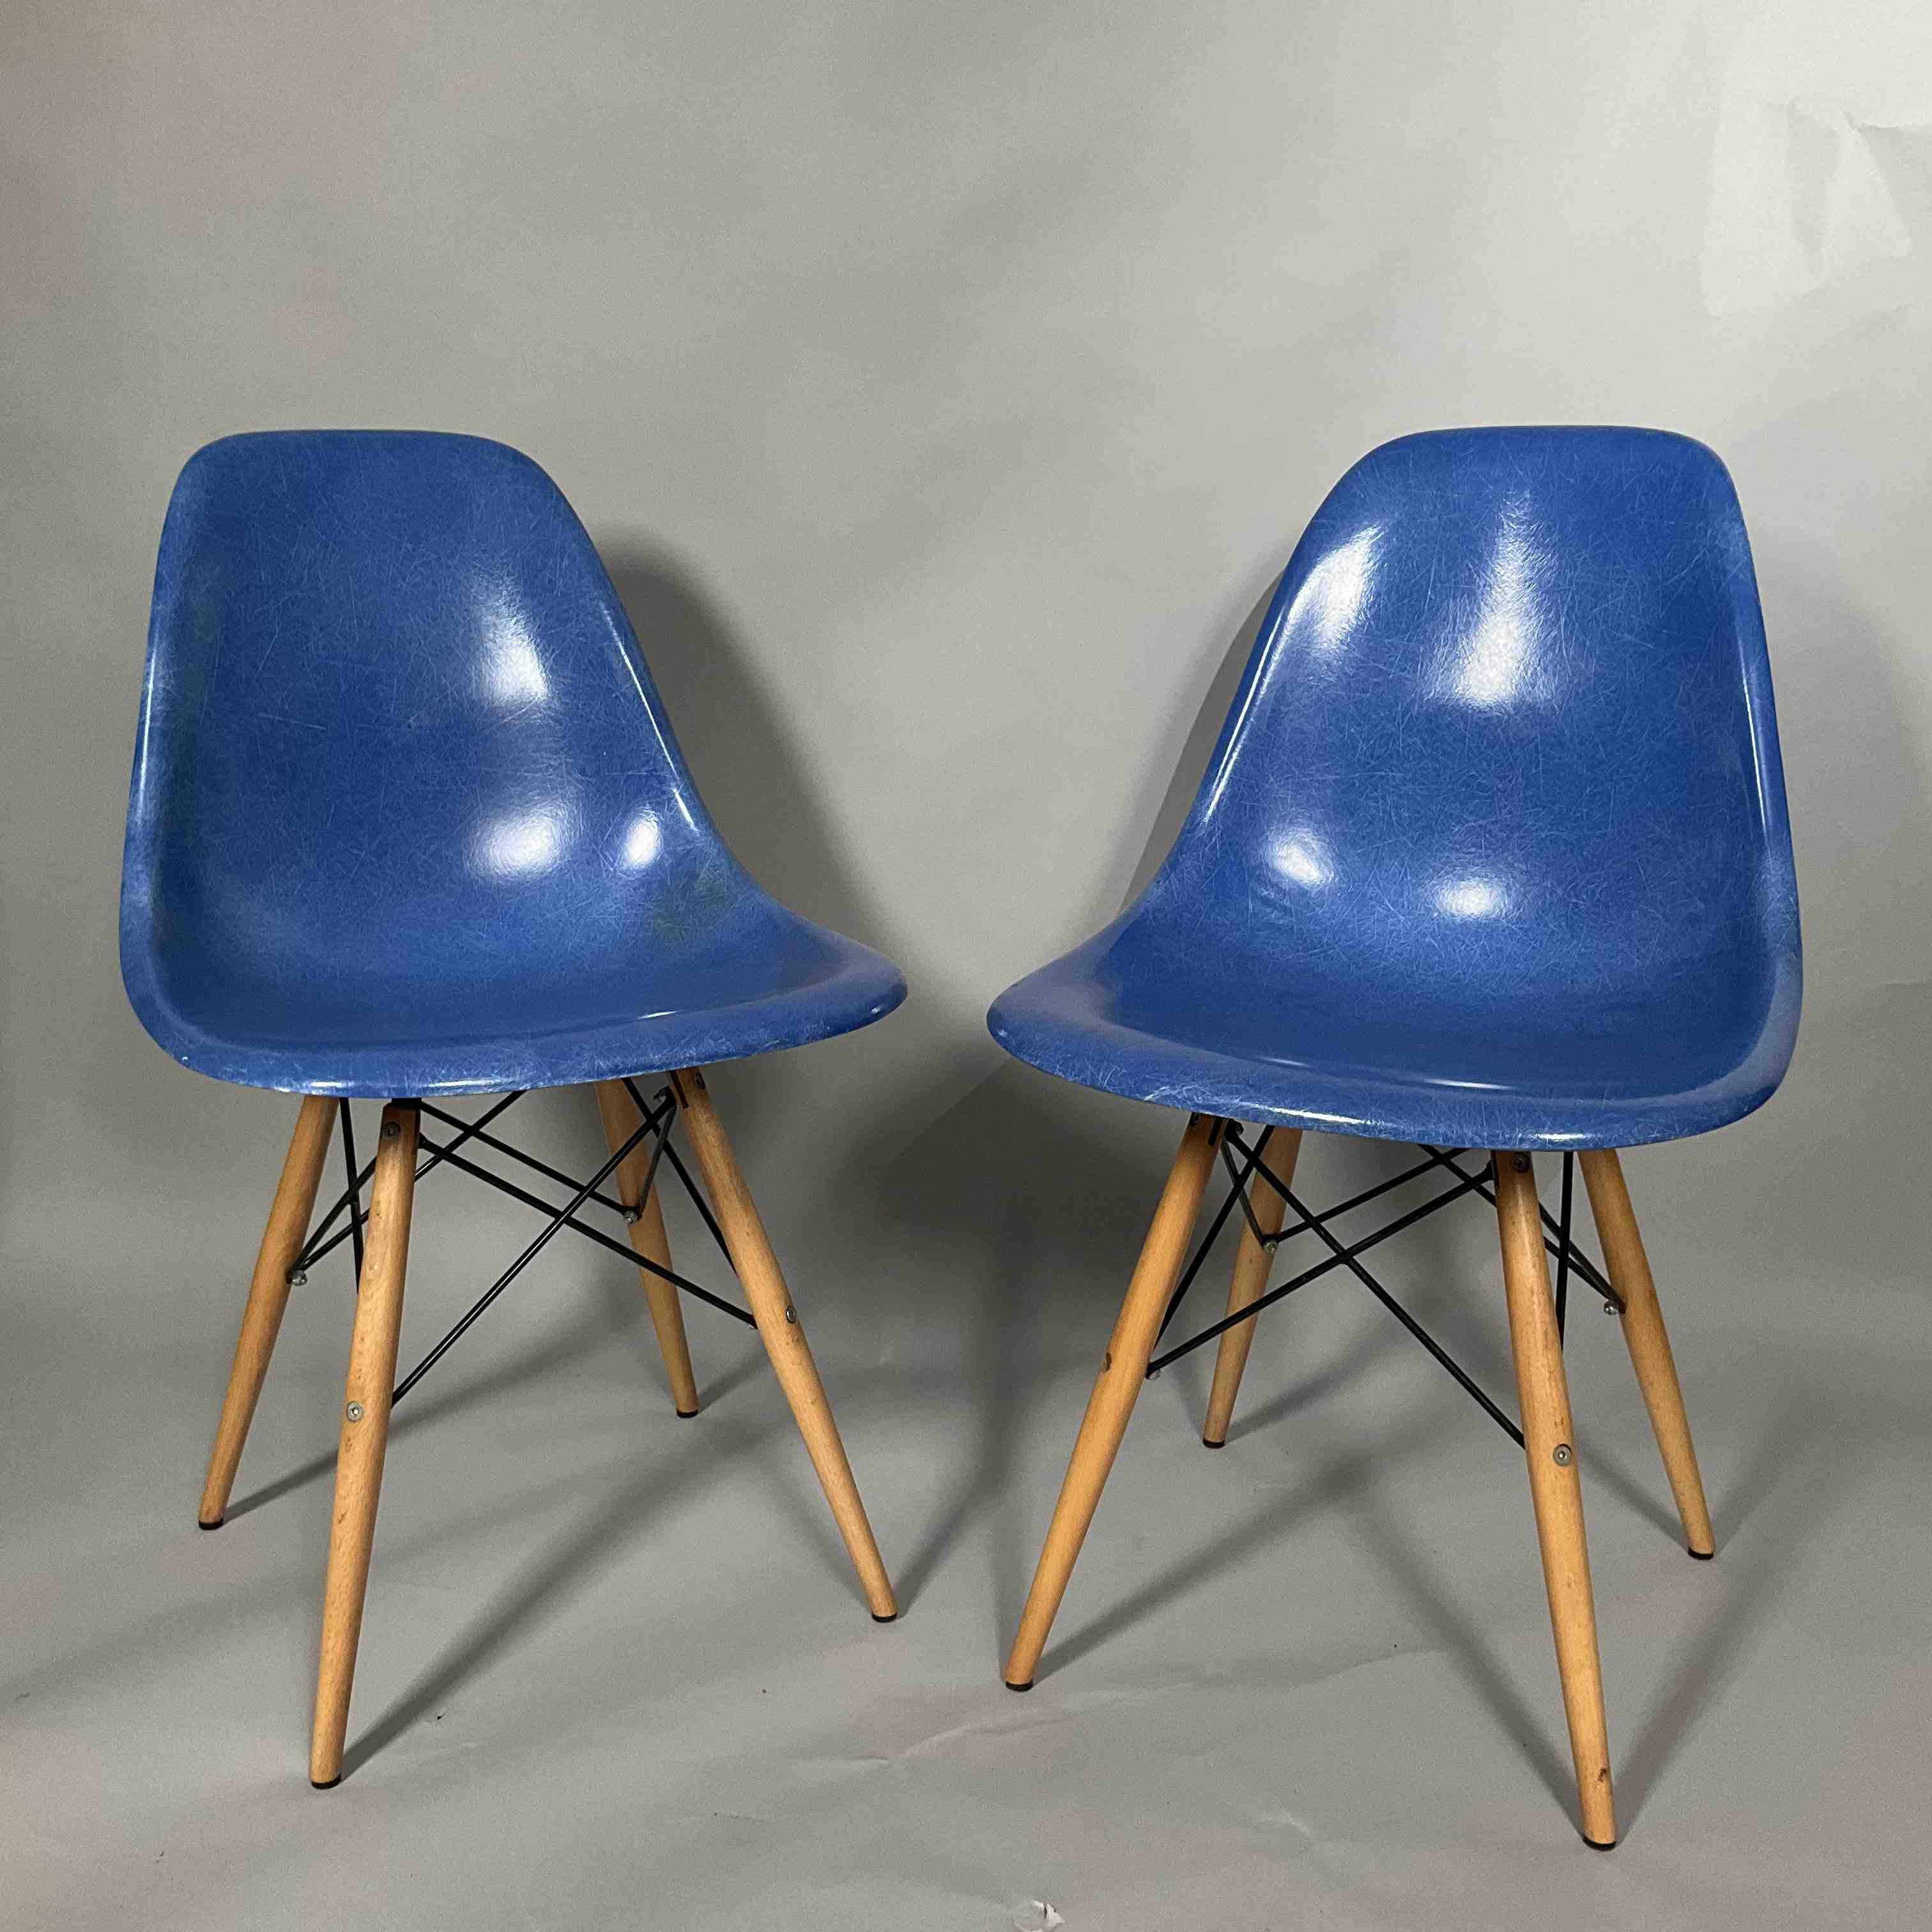 Charles (1907-1978) et Ray (1912-1989) EAMES - Edition Herman Miller
PAIRE...